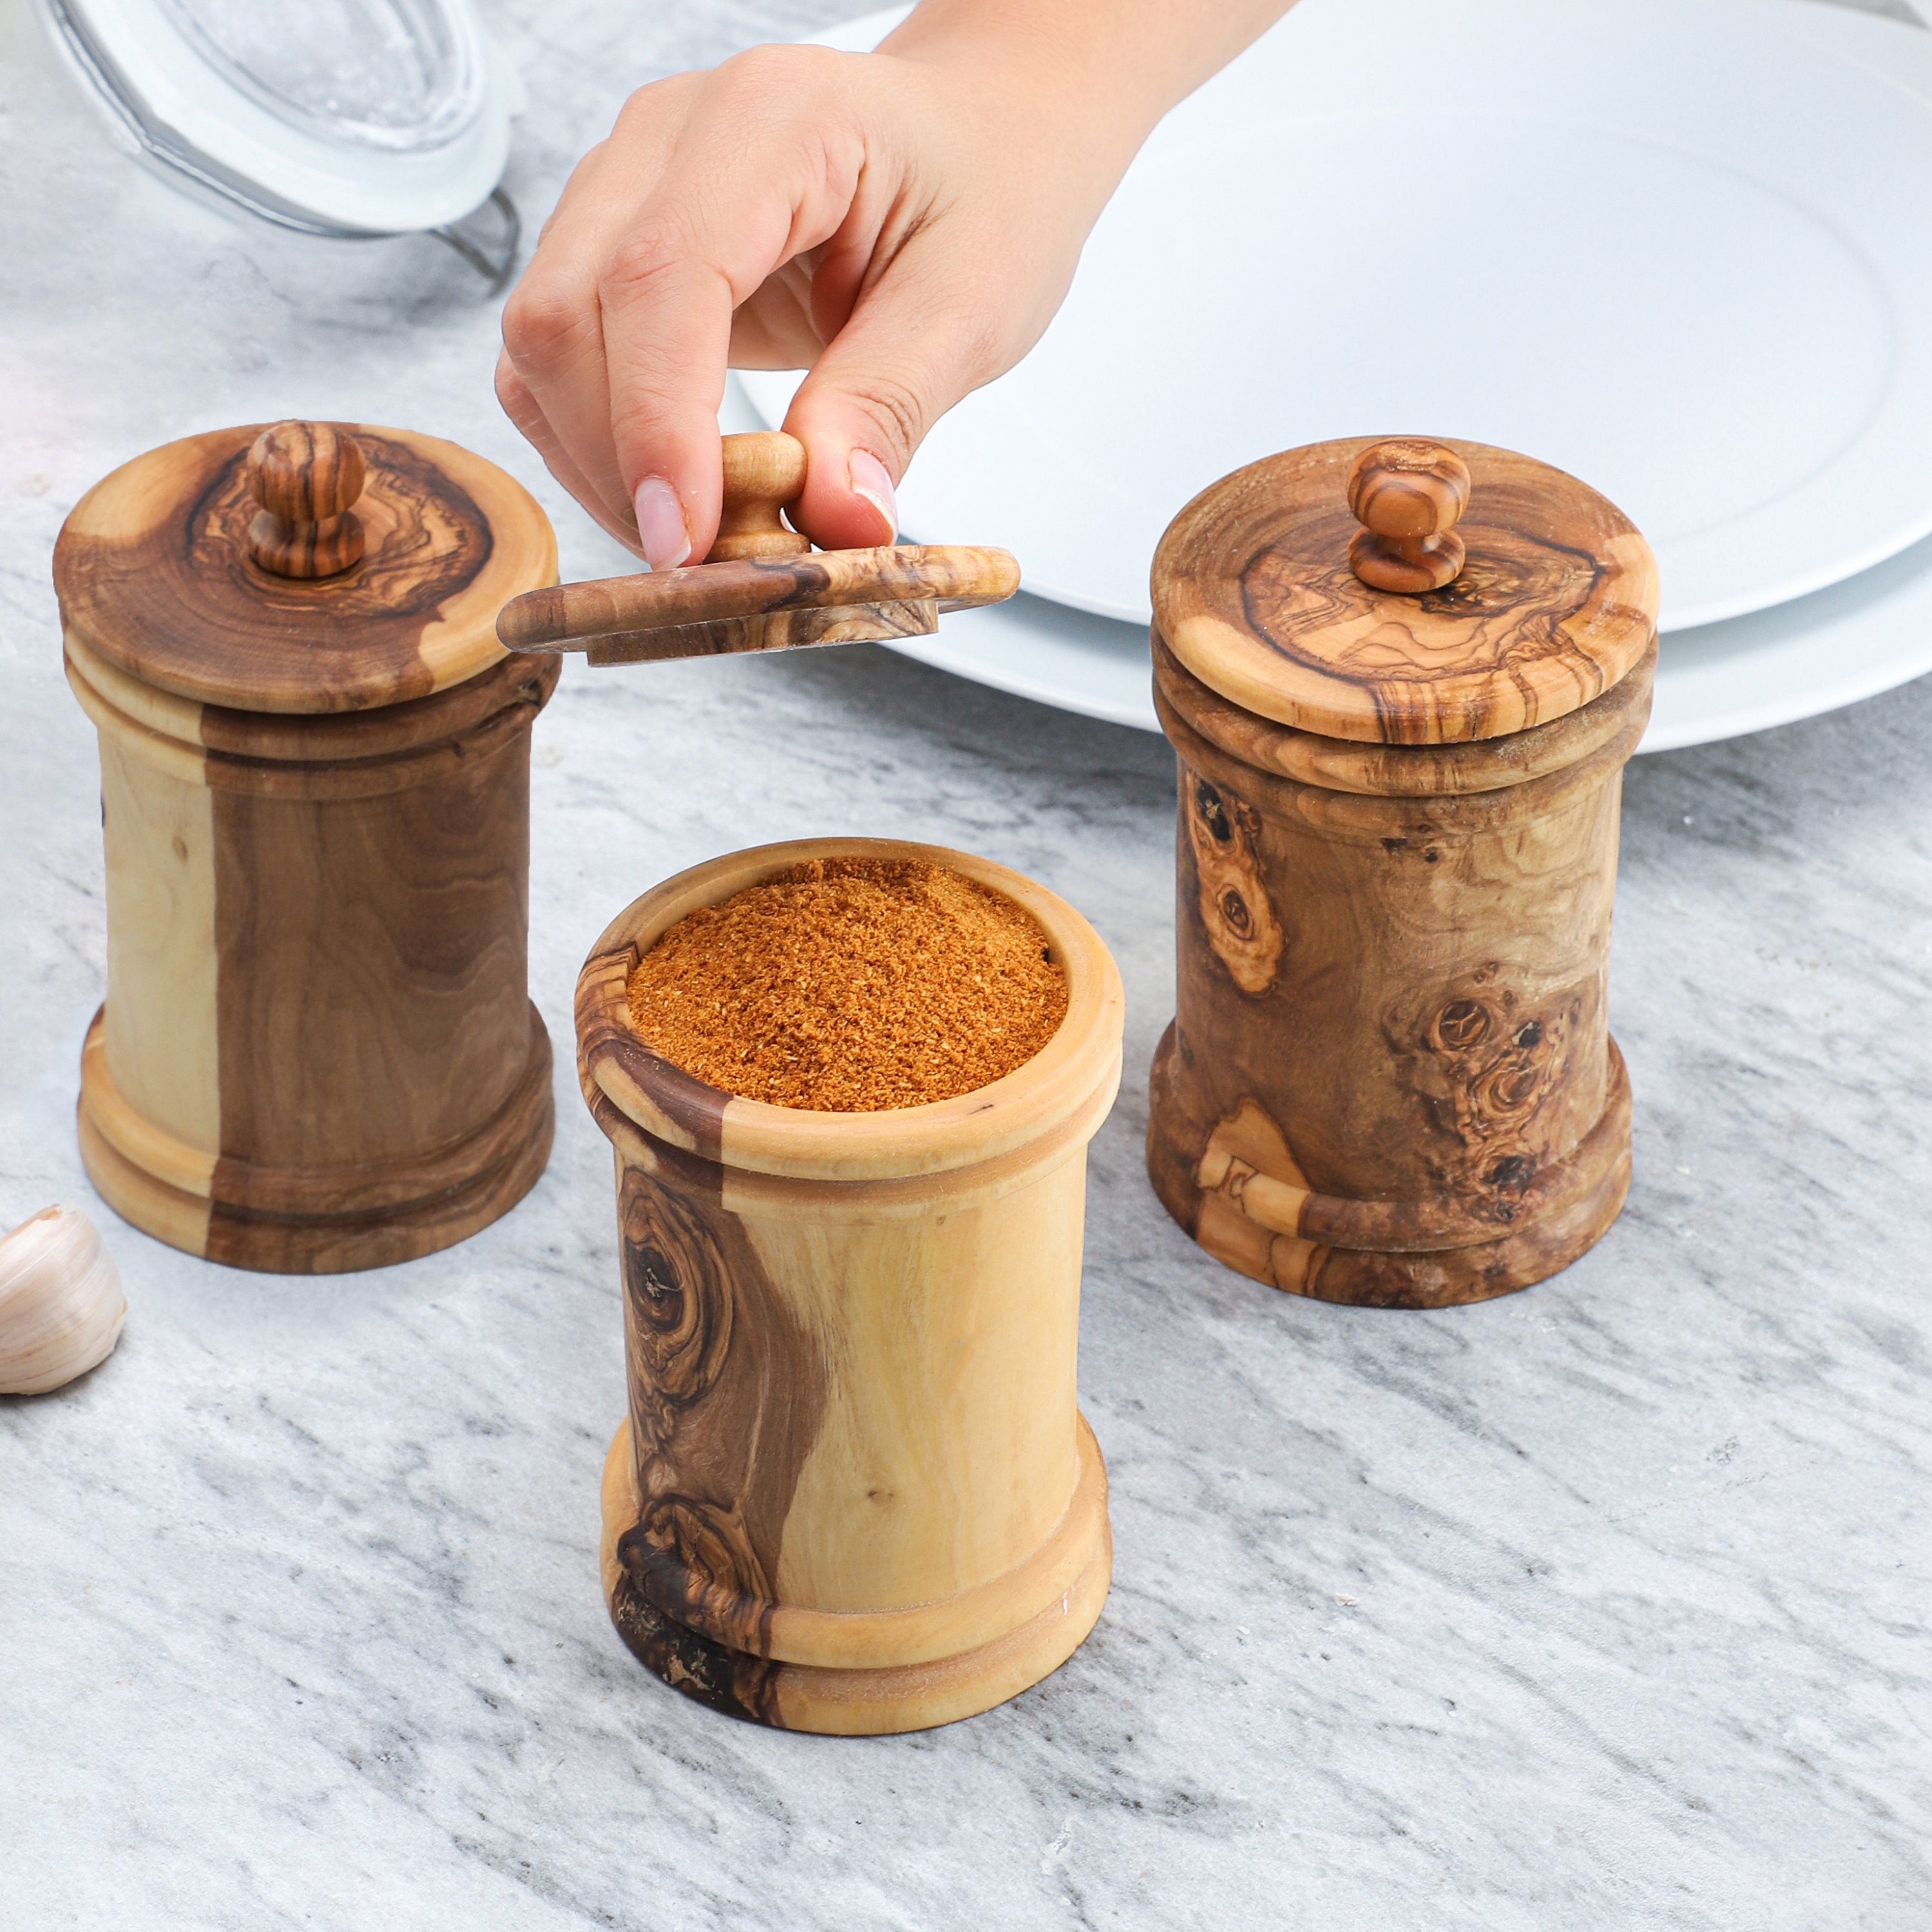 Set of 3 Spice Jars Handmade From Olive Wood / Spice Jar Set / Spice Box  Set / Wooden Salt Box / Salt Cellar With Lid FREE Wood Beeswax 